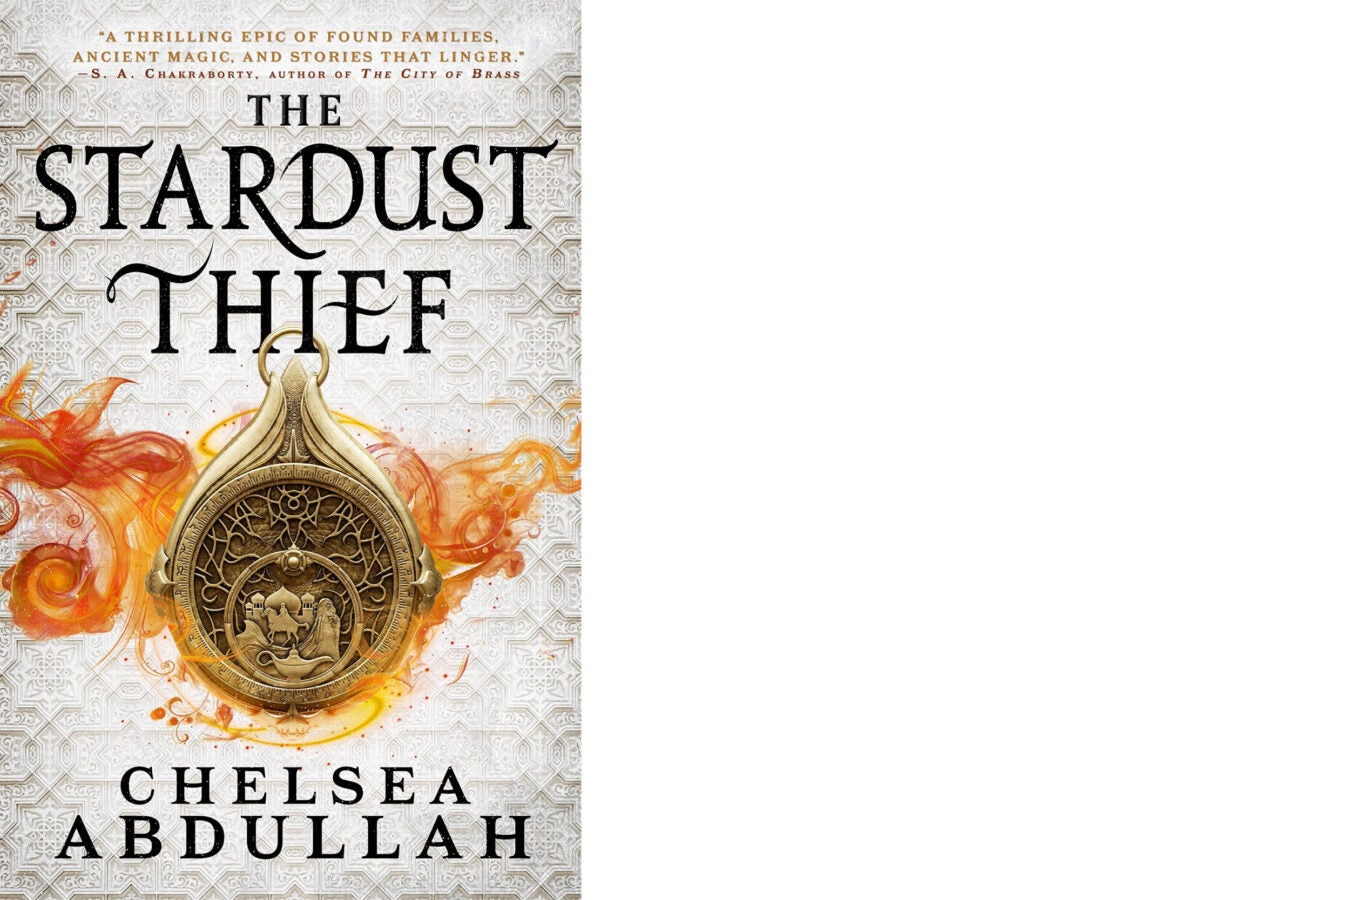 Book cover: “The Stardust Thief” by Chelsea Abdullah.